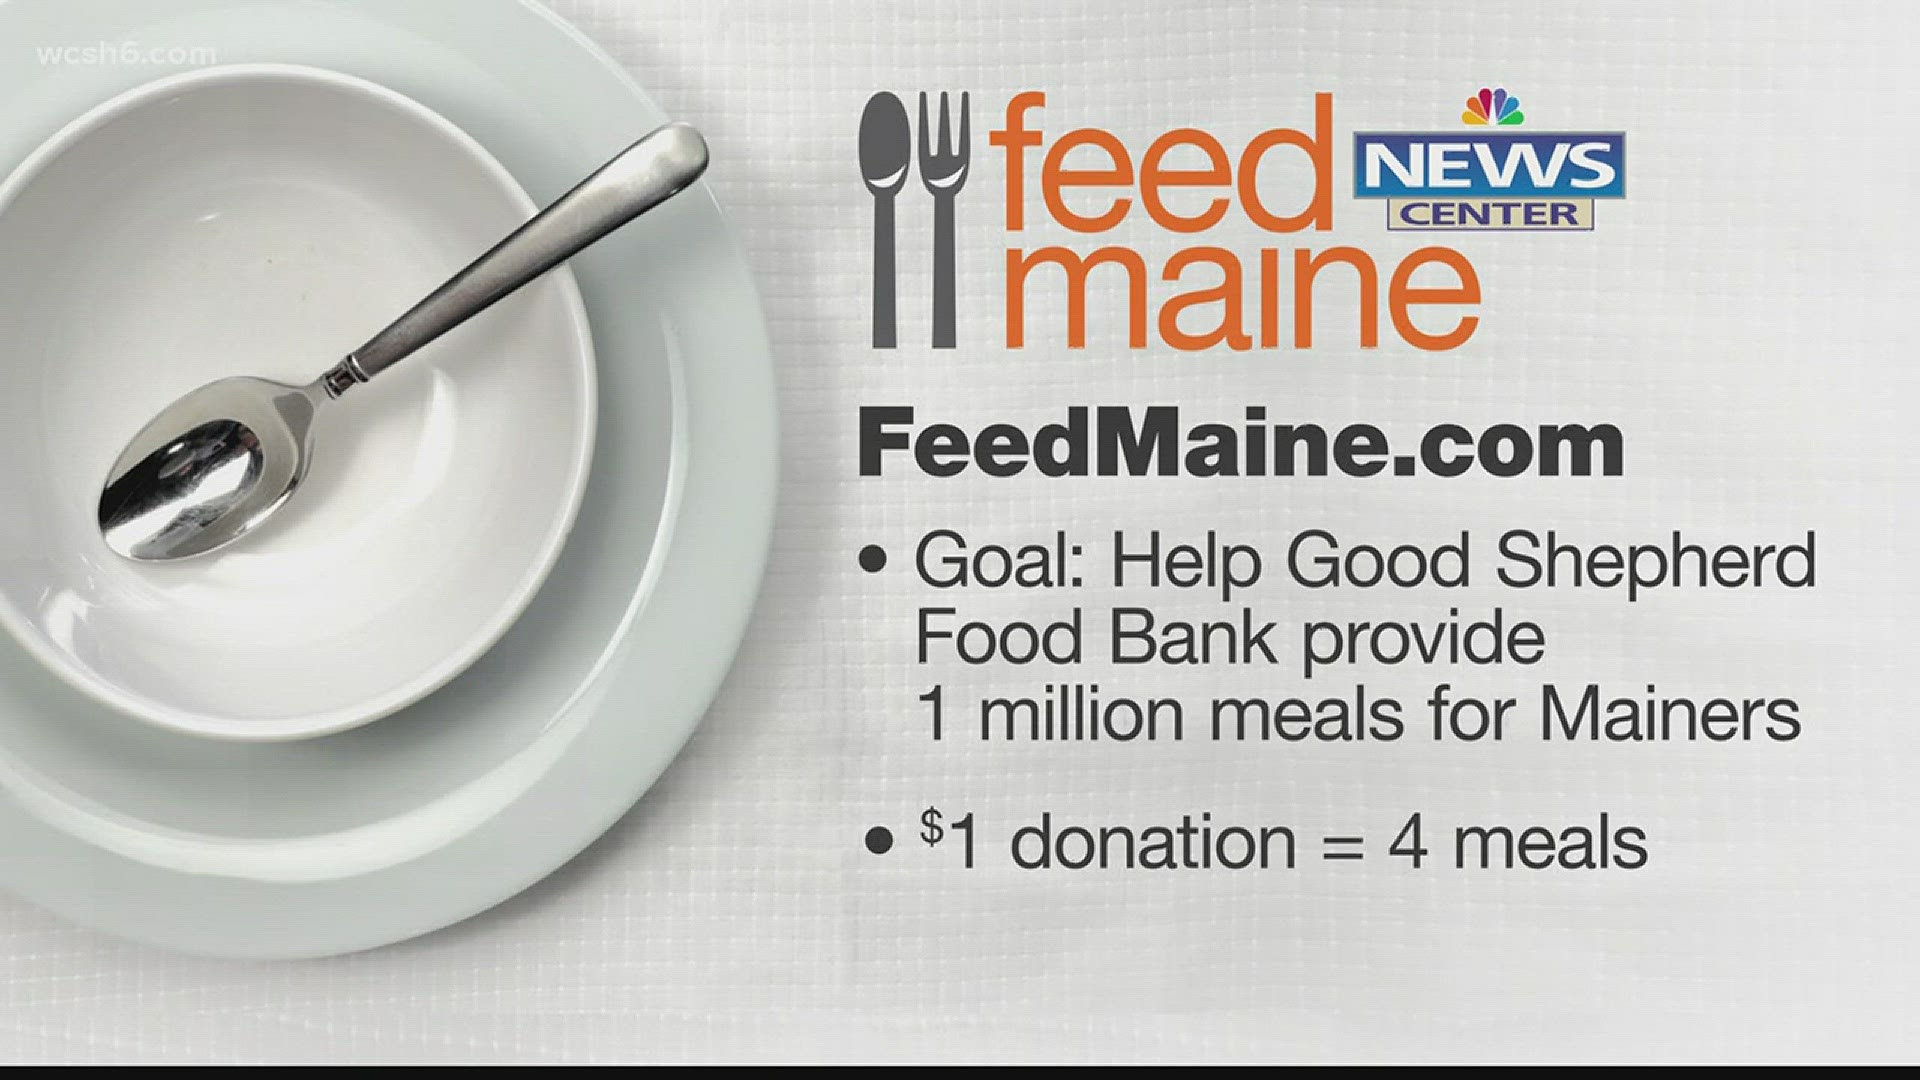 Making healthy choices Feed Maine